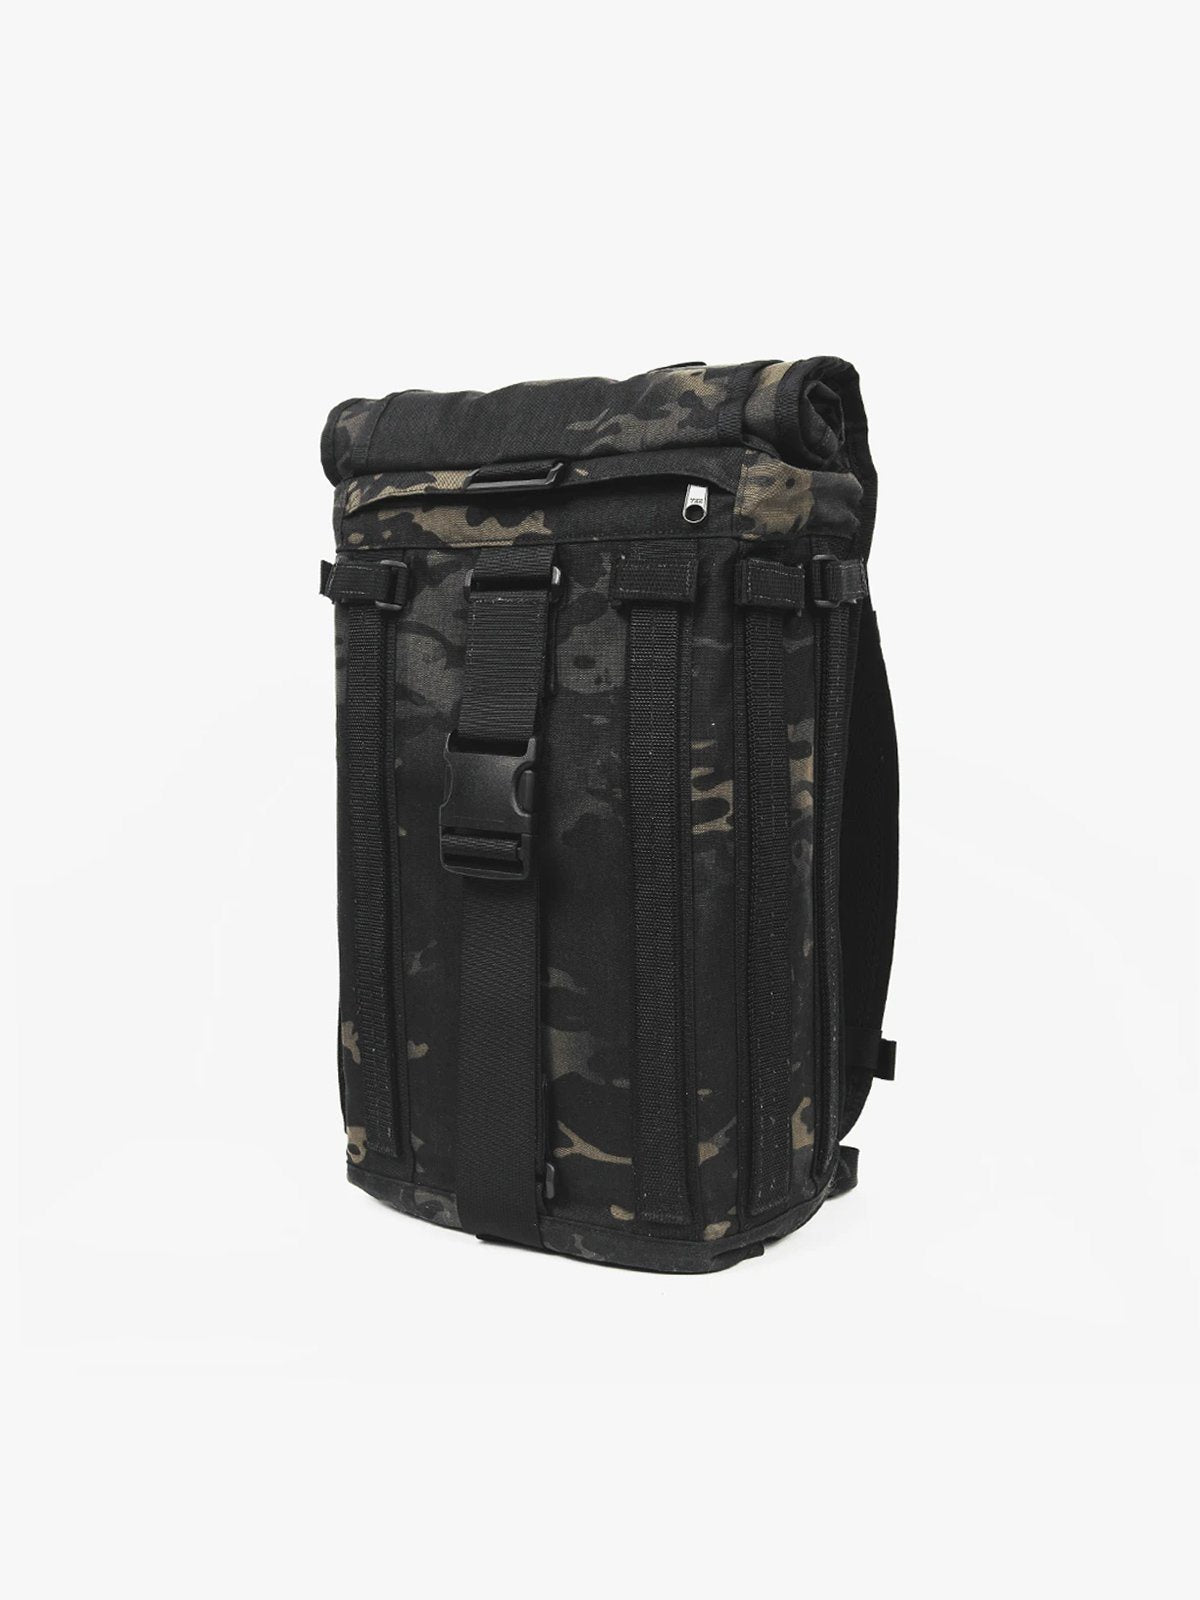 R6 Arkiv Field Pack 20L by Mission Workshop - Bolsas impermeables y ropa técnica - San Francisco & Los Angeles - Built to endure - Guaranteed forever